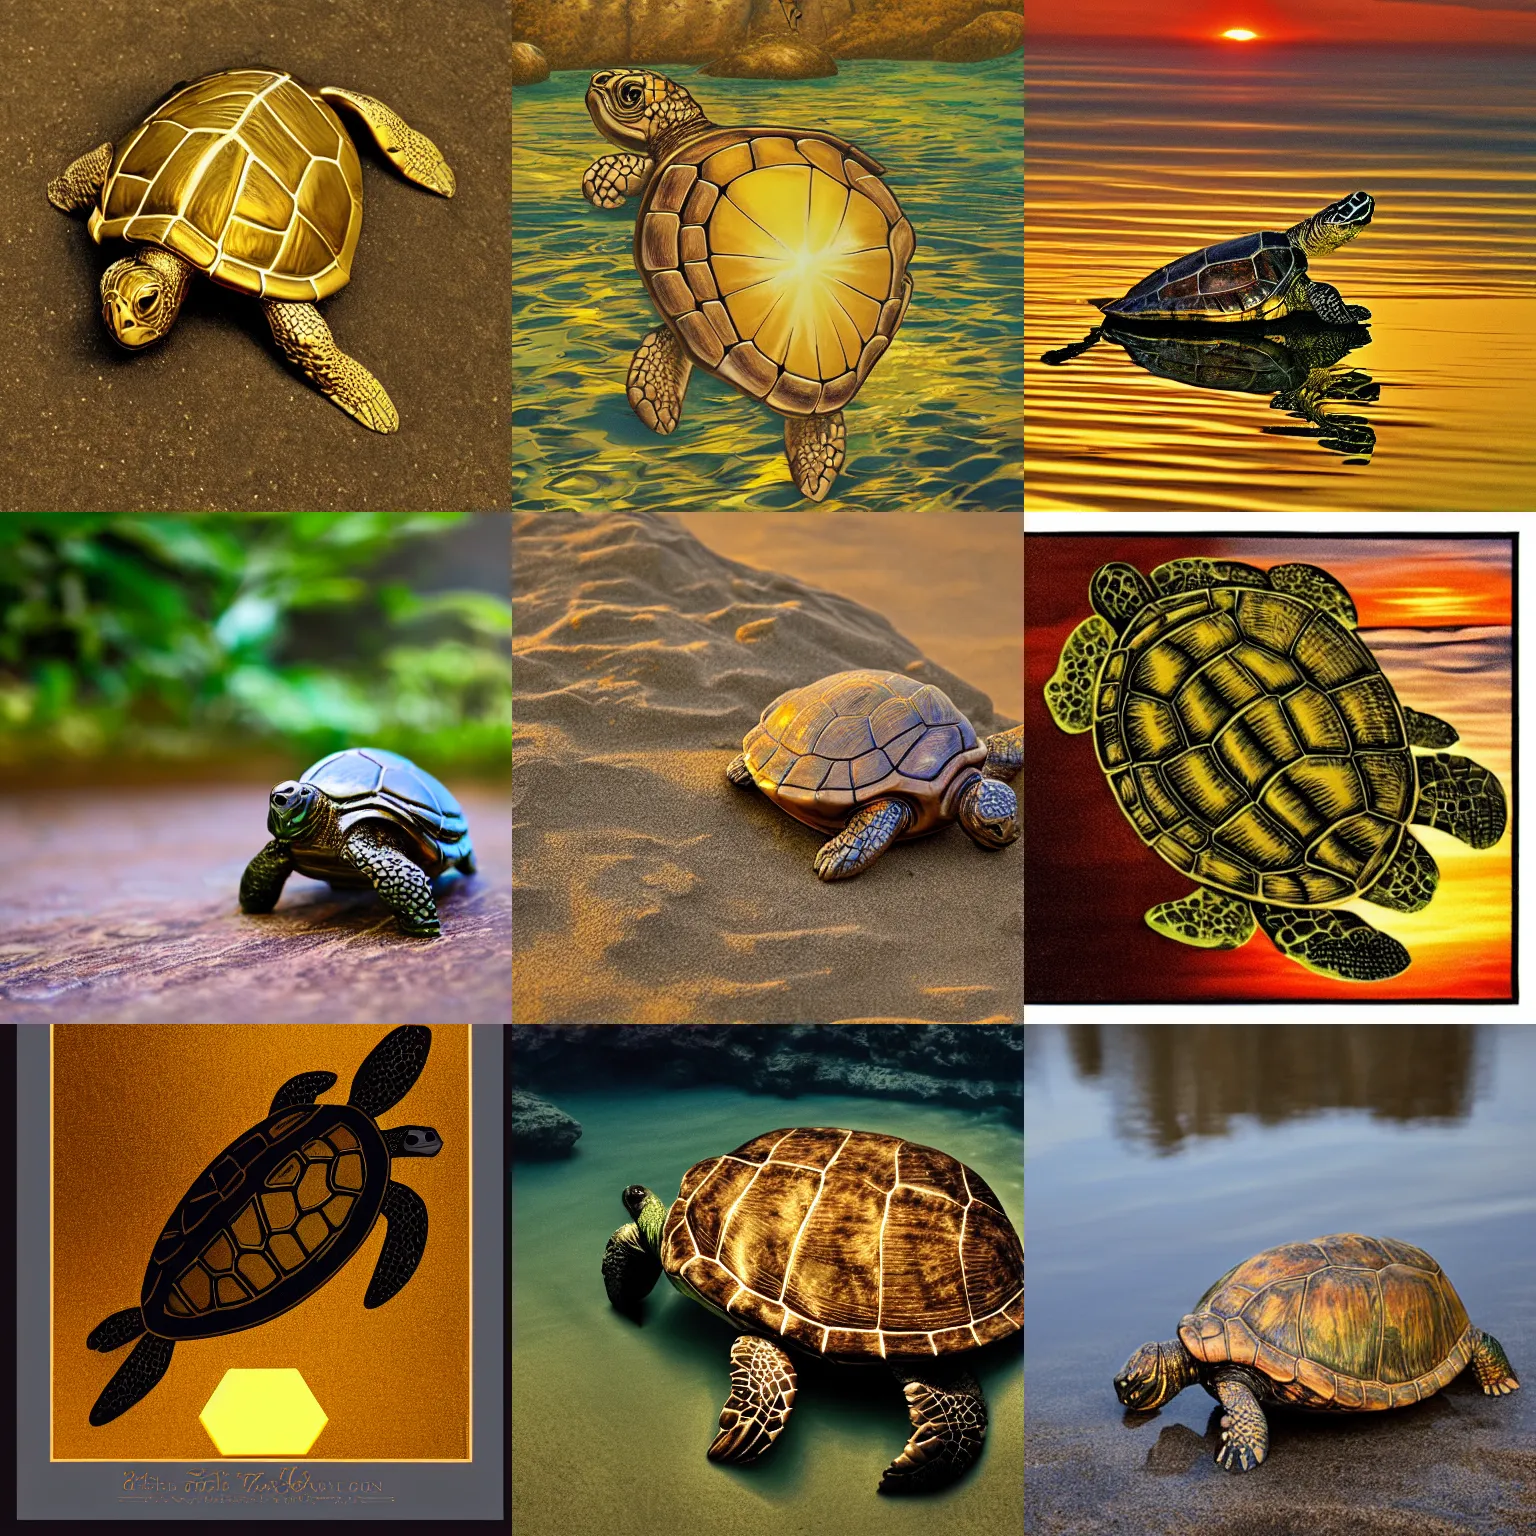 Prompt: the breathing turtle, the golden hour